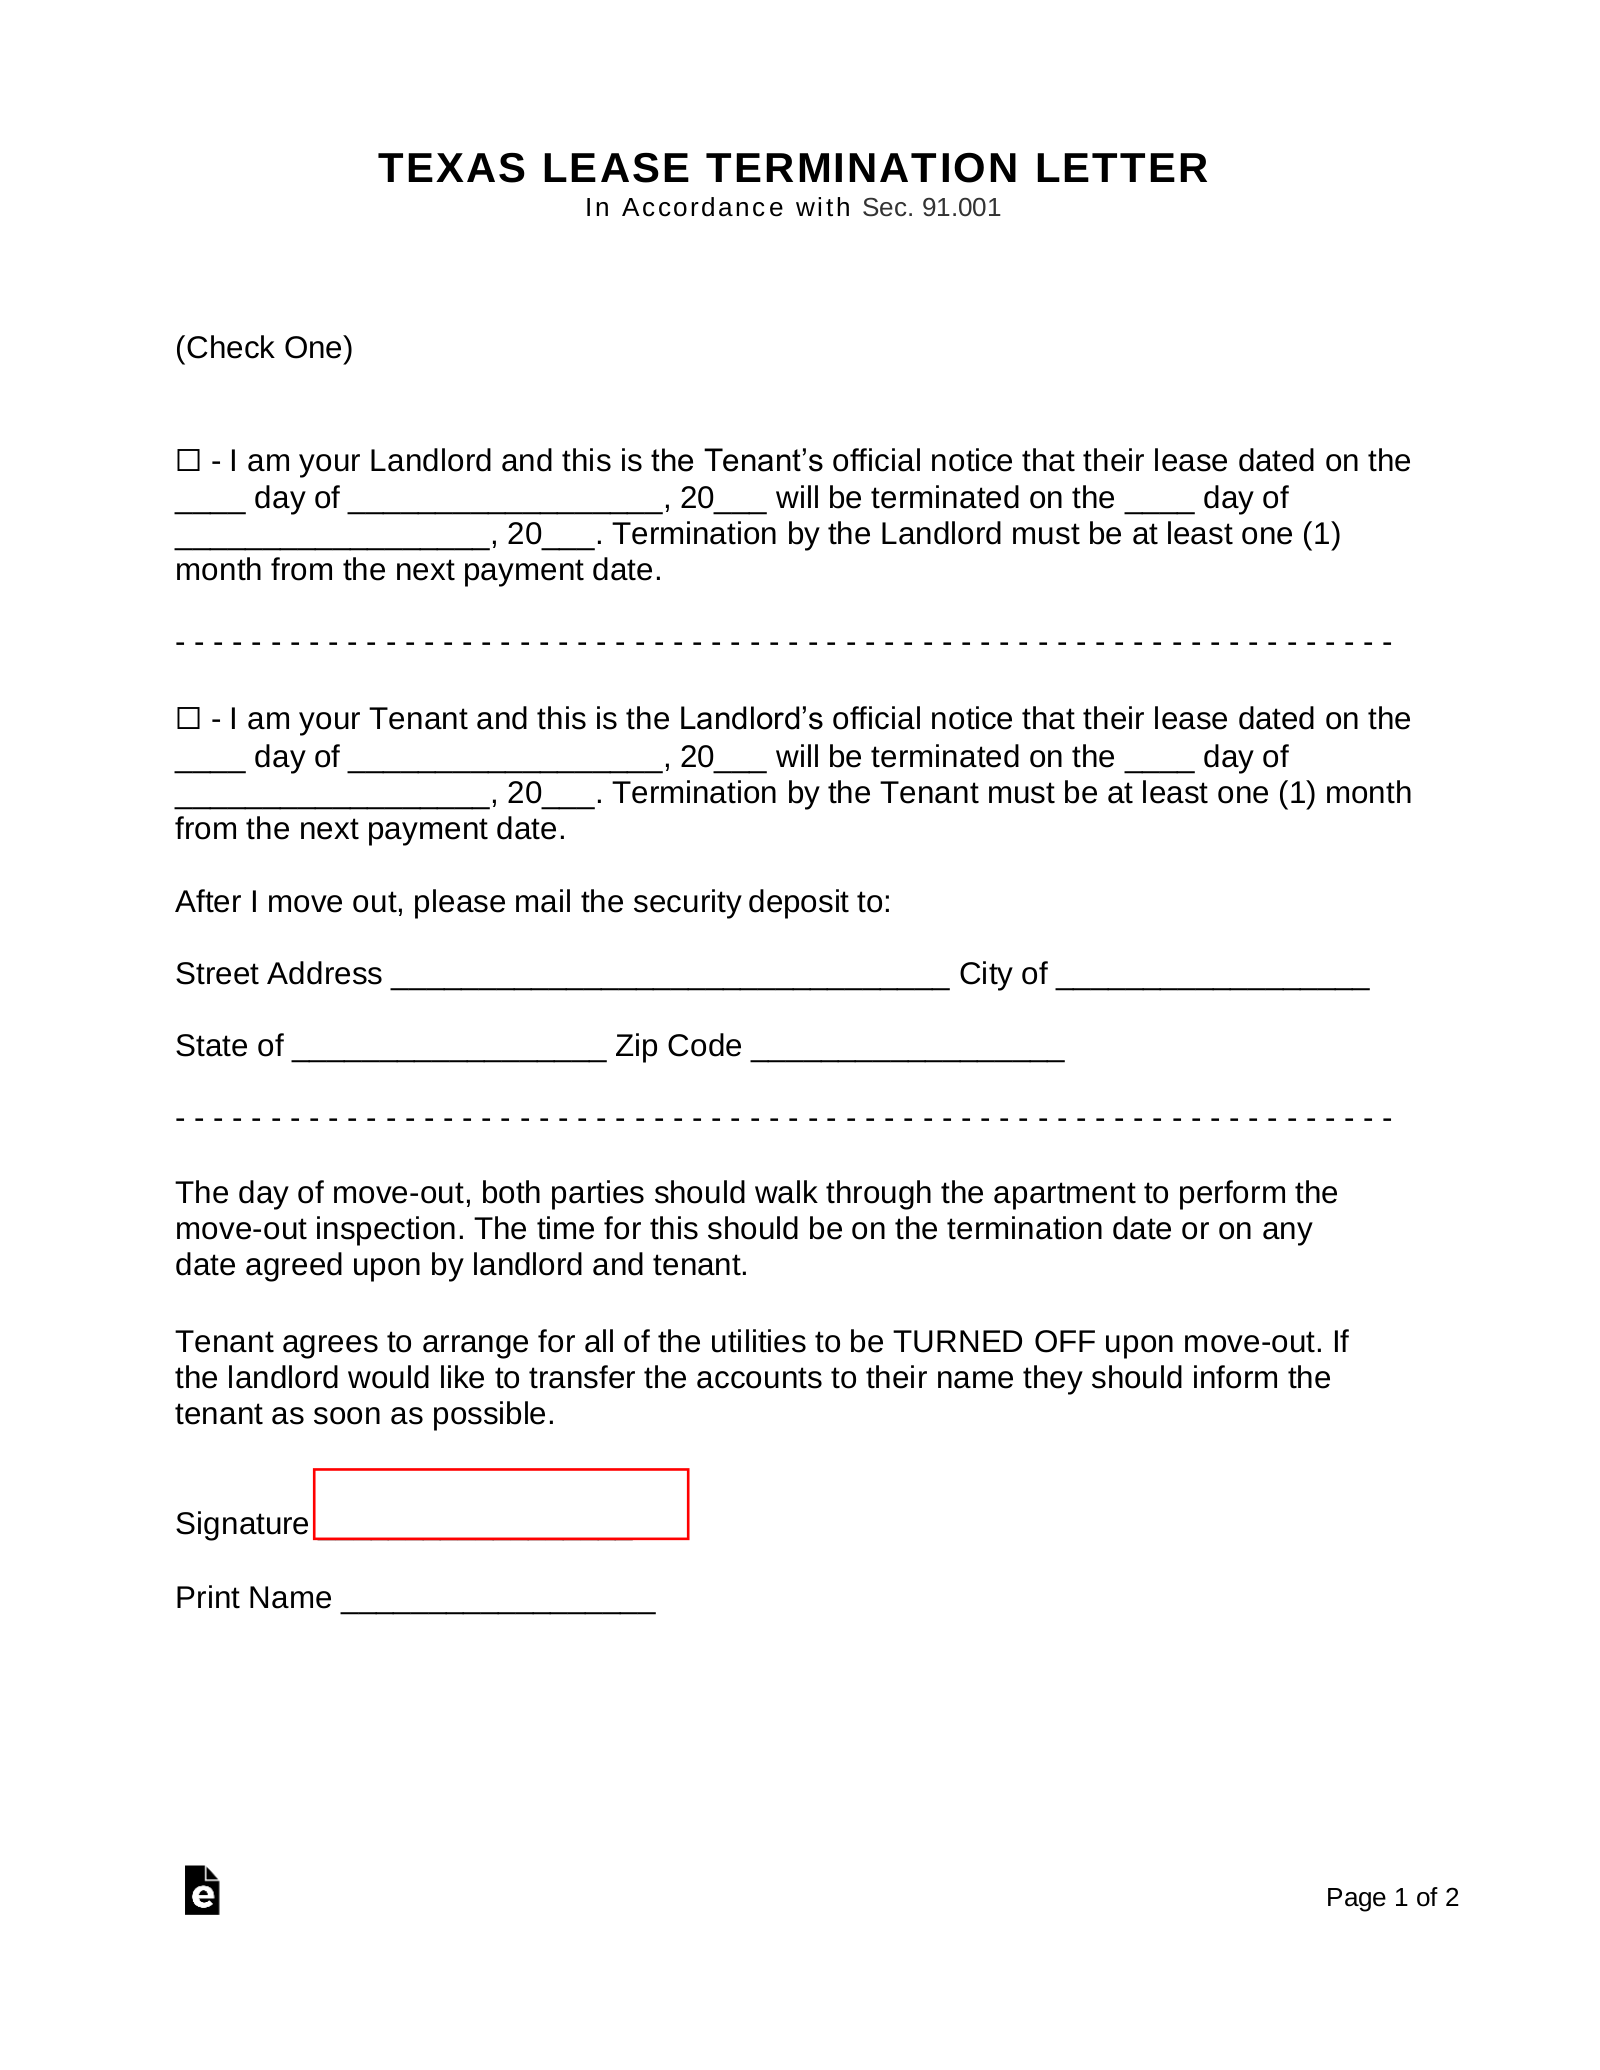 Texas Lease Termination Letter Form 30 Day Notice Eforms